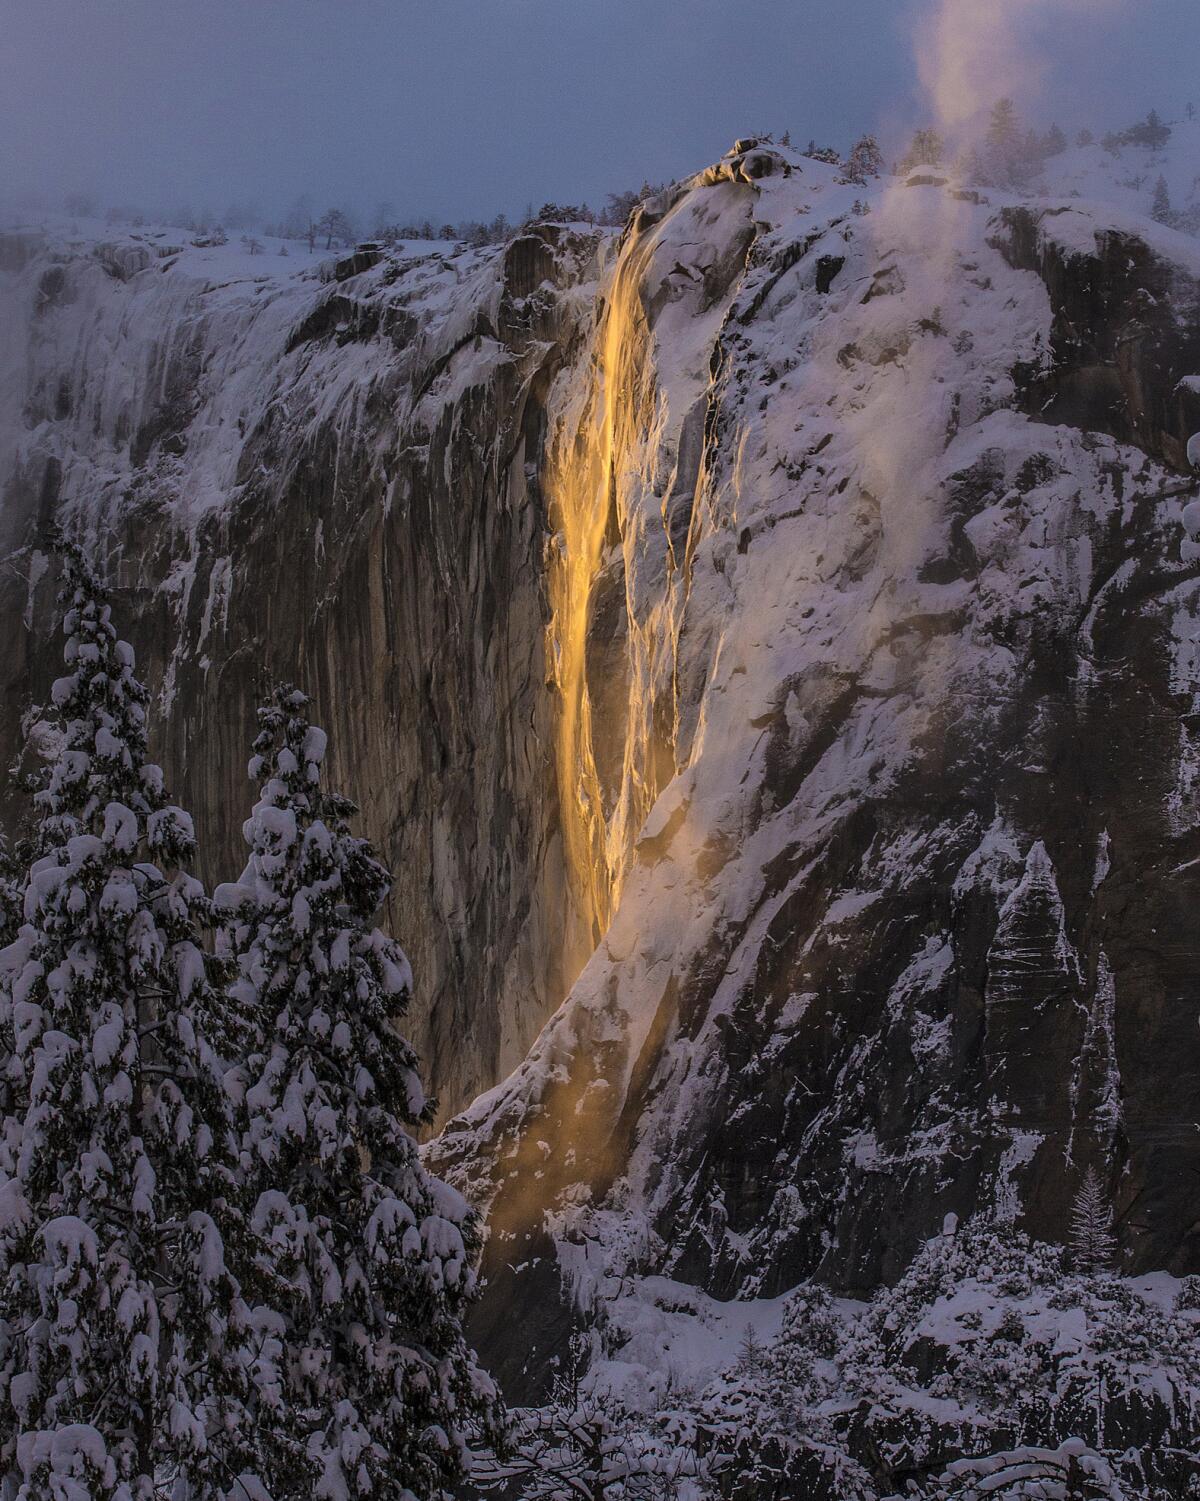 Horsetail Fall in Yosemite National Park on Feb. 17.